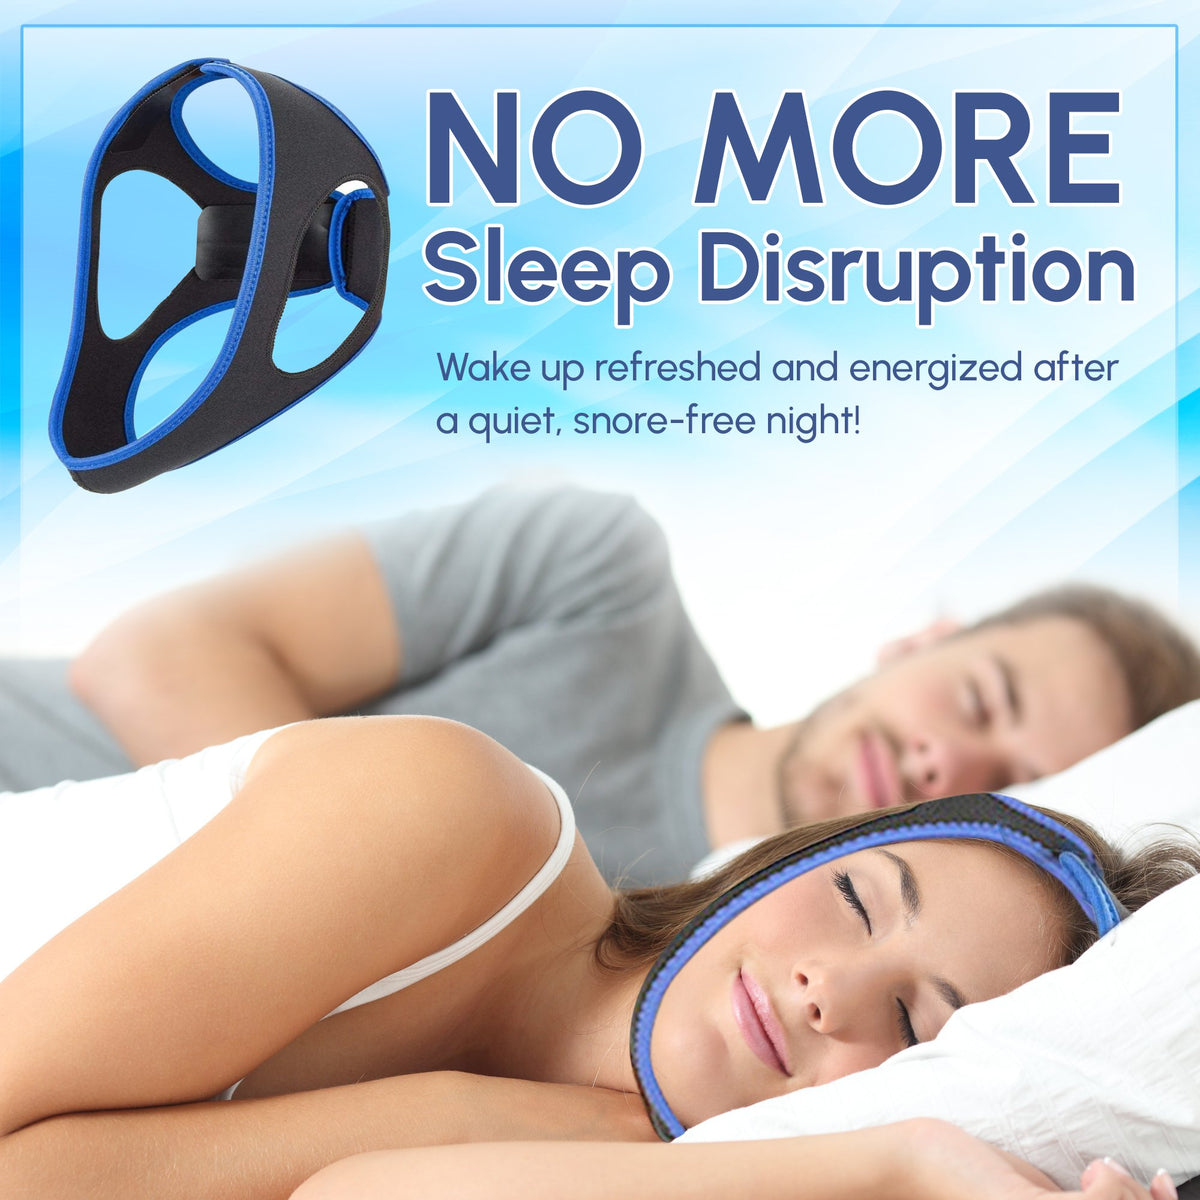 Adjustable Anti Snore Chin Strap - Effective Snoring Solution - Breathable CPAP Alternative - Unisex, Adjustable, Sleep Apnea Aid - Chin Strap for Snoring